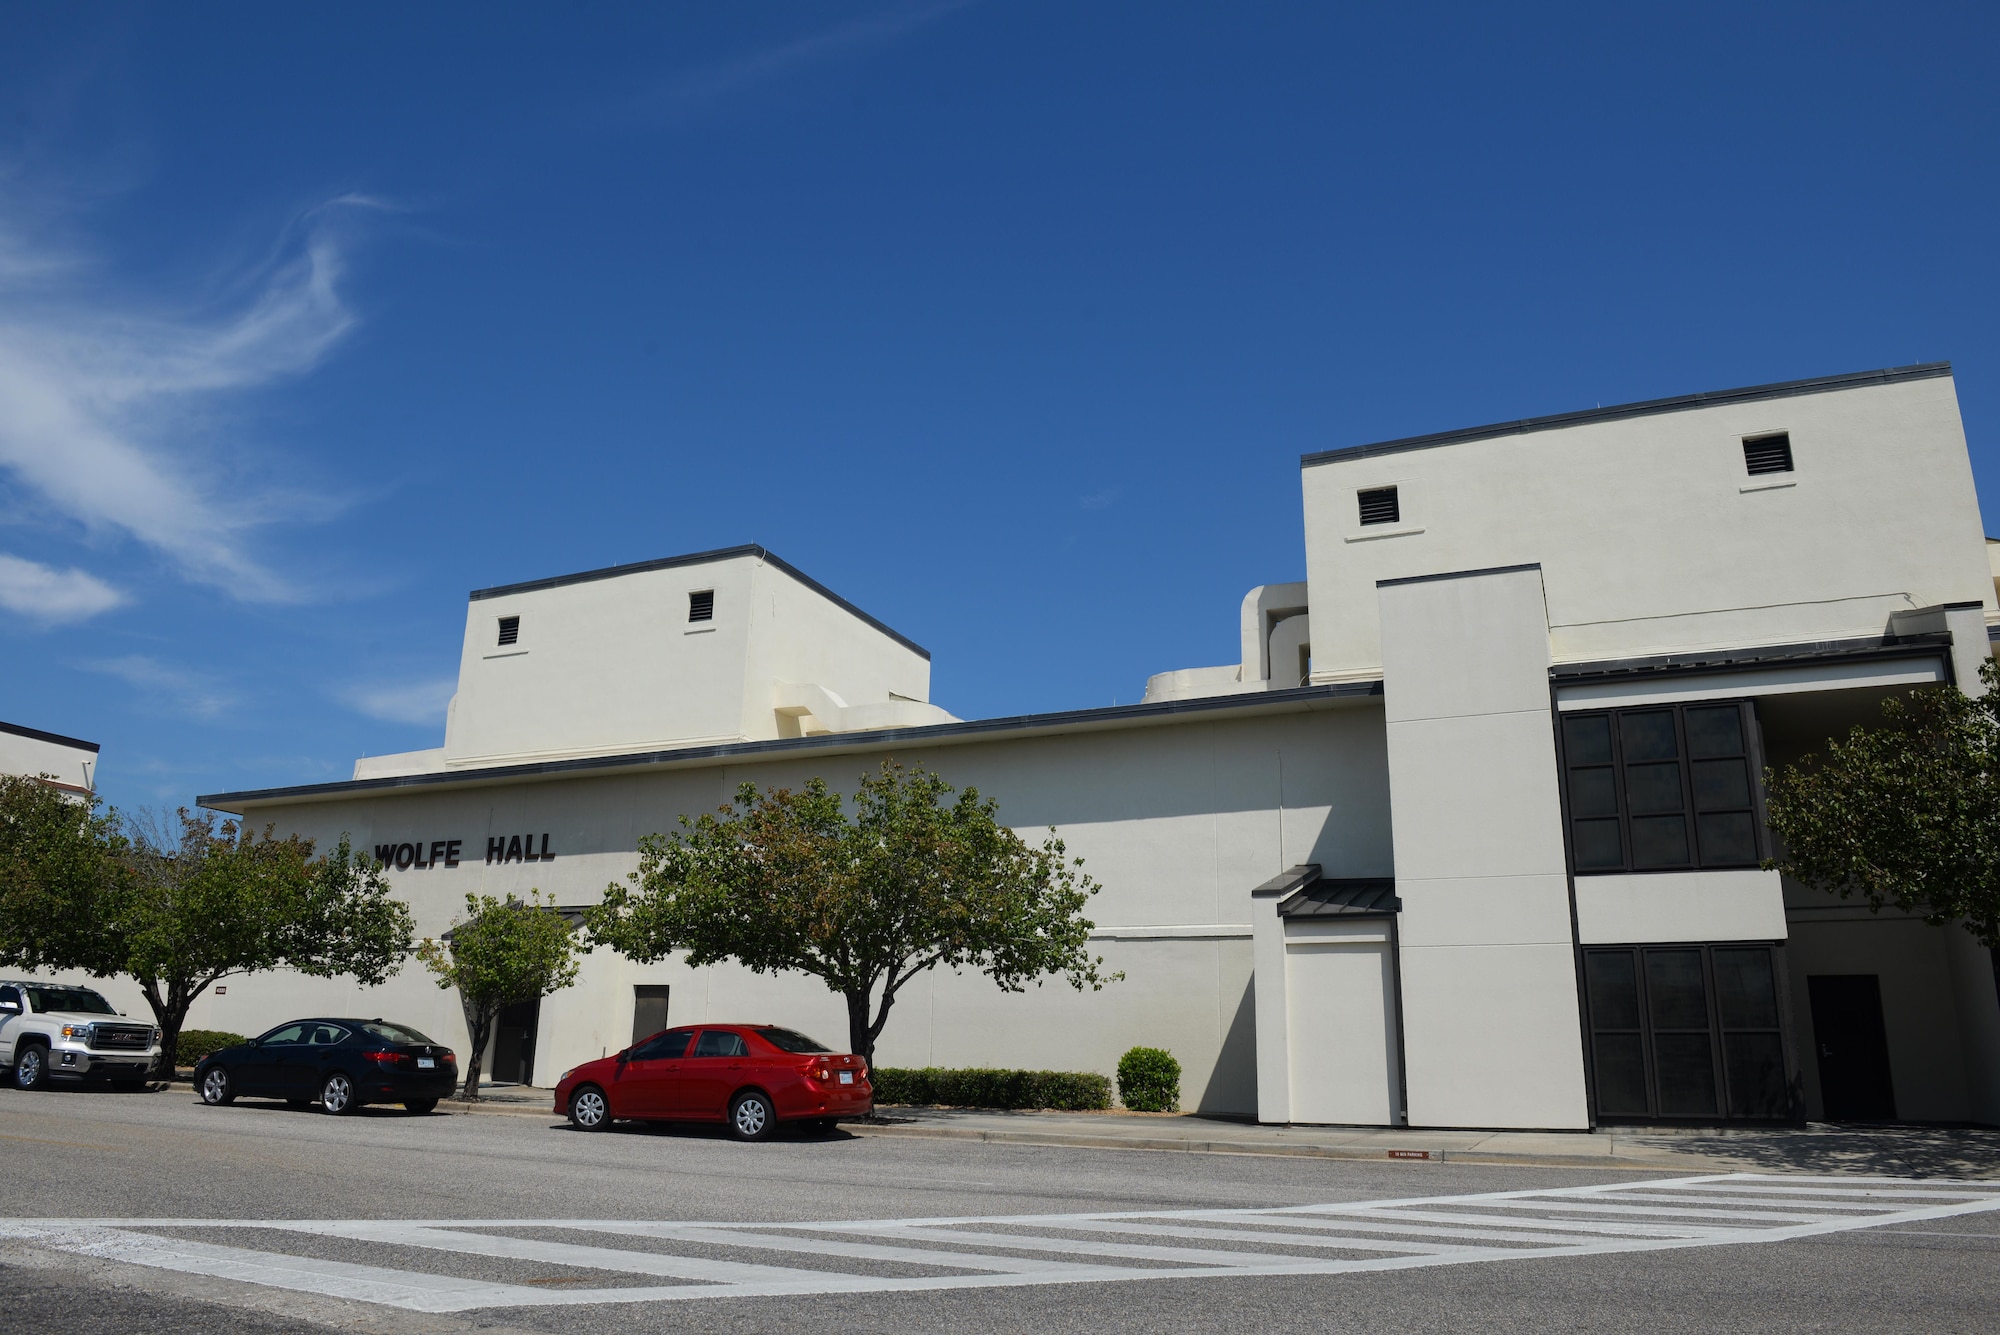 Wolfe Hall is located on Meadows Dr, Bldg. 4330. Today, Wolfe Hall houses the 335th Training Squadron’s Precision Measure Equipment Lab Course as well as the Officer Personnel Course.